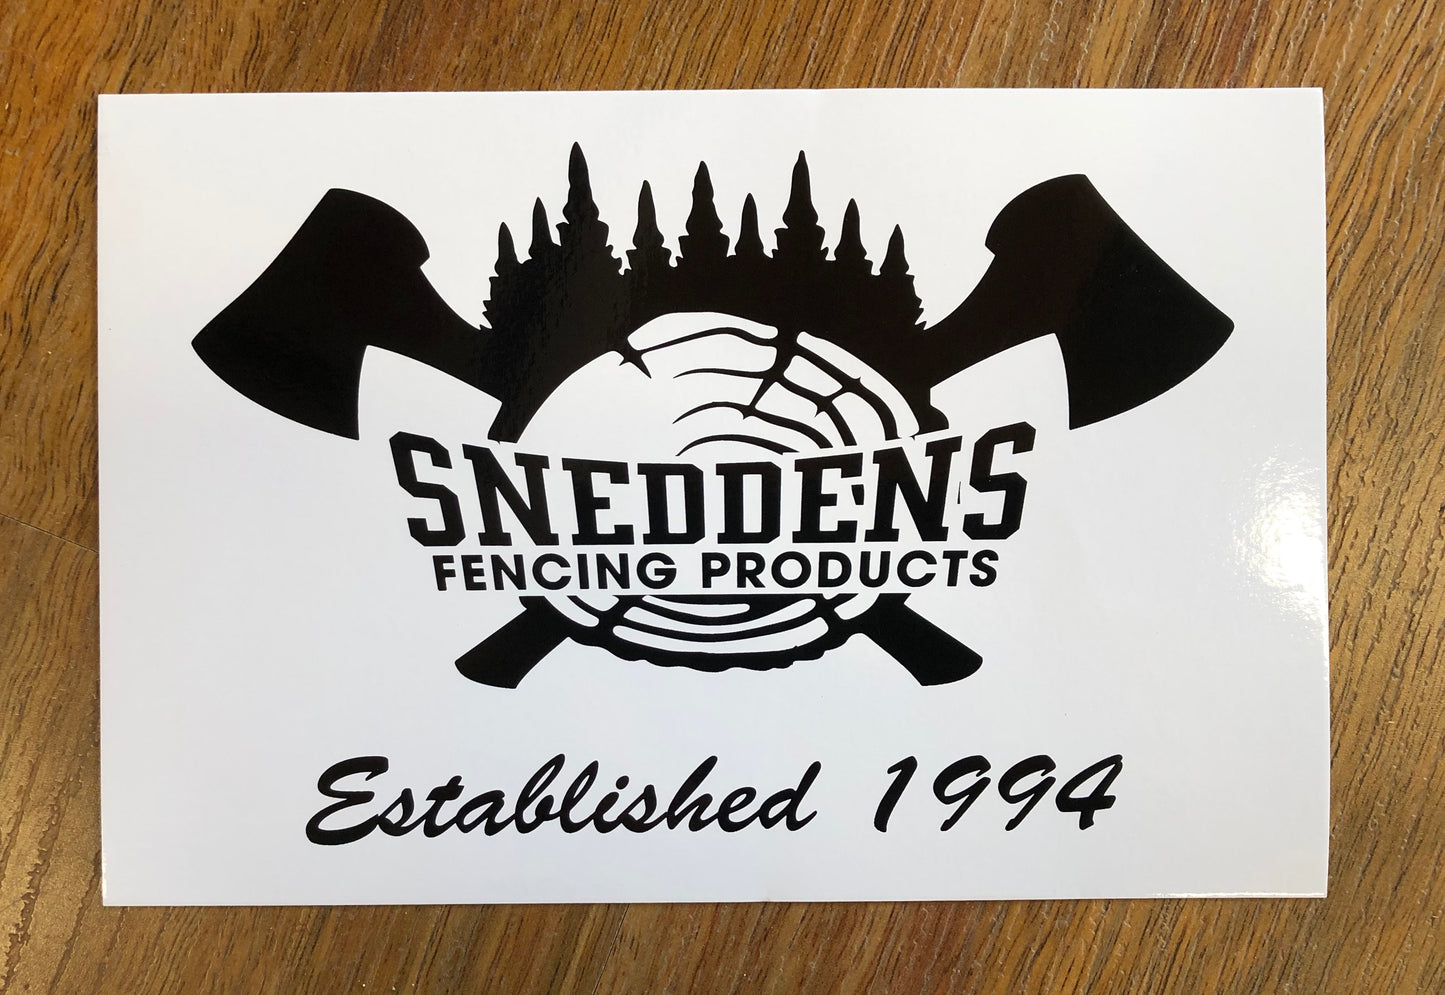 Snedden's Fencing Products Stickers - Black on White Background